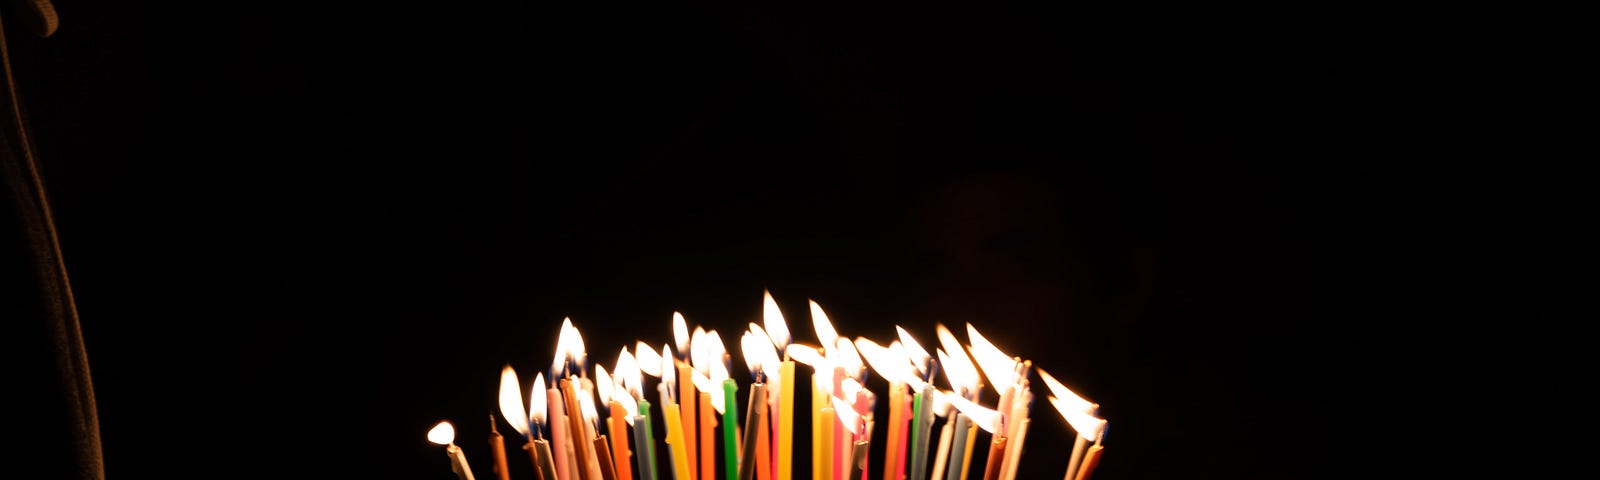 Image of a birthday cake with candles.